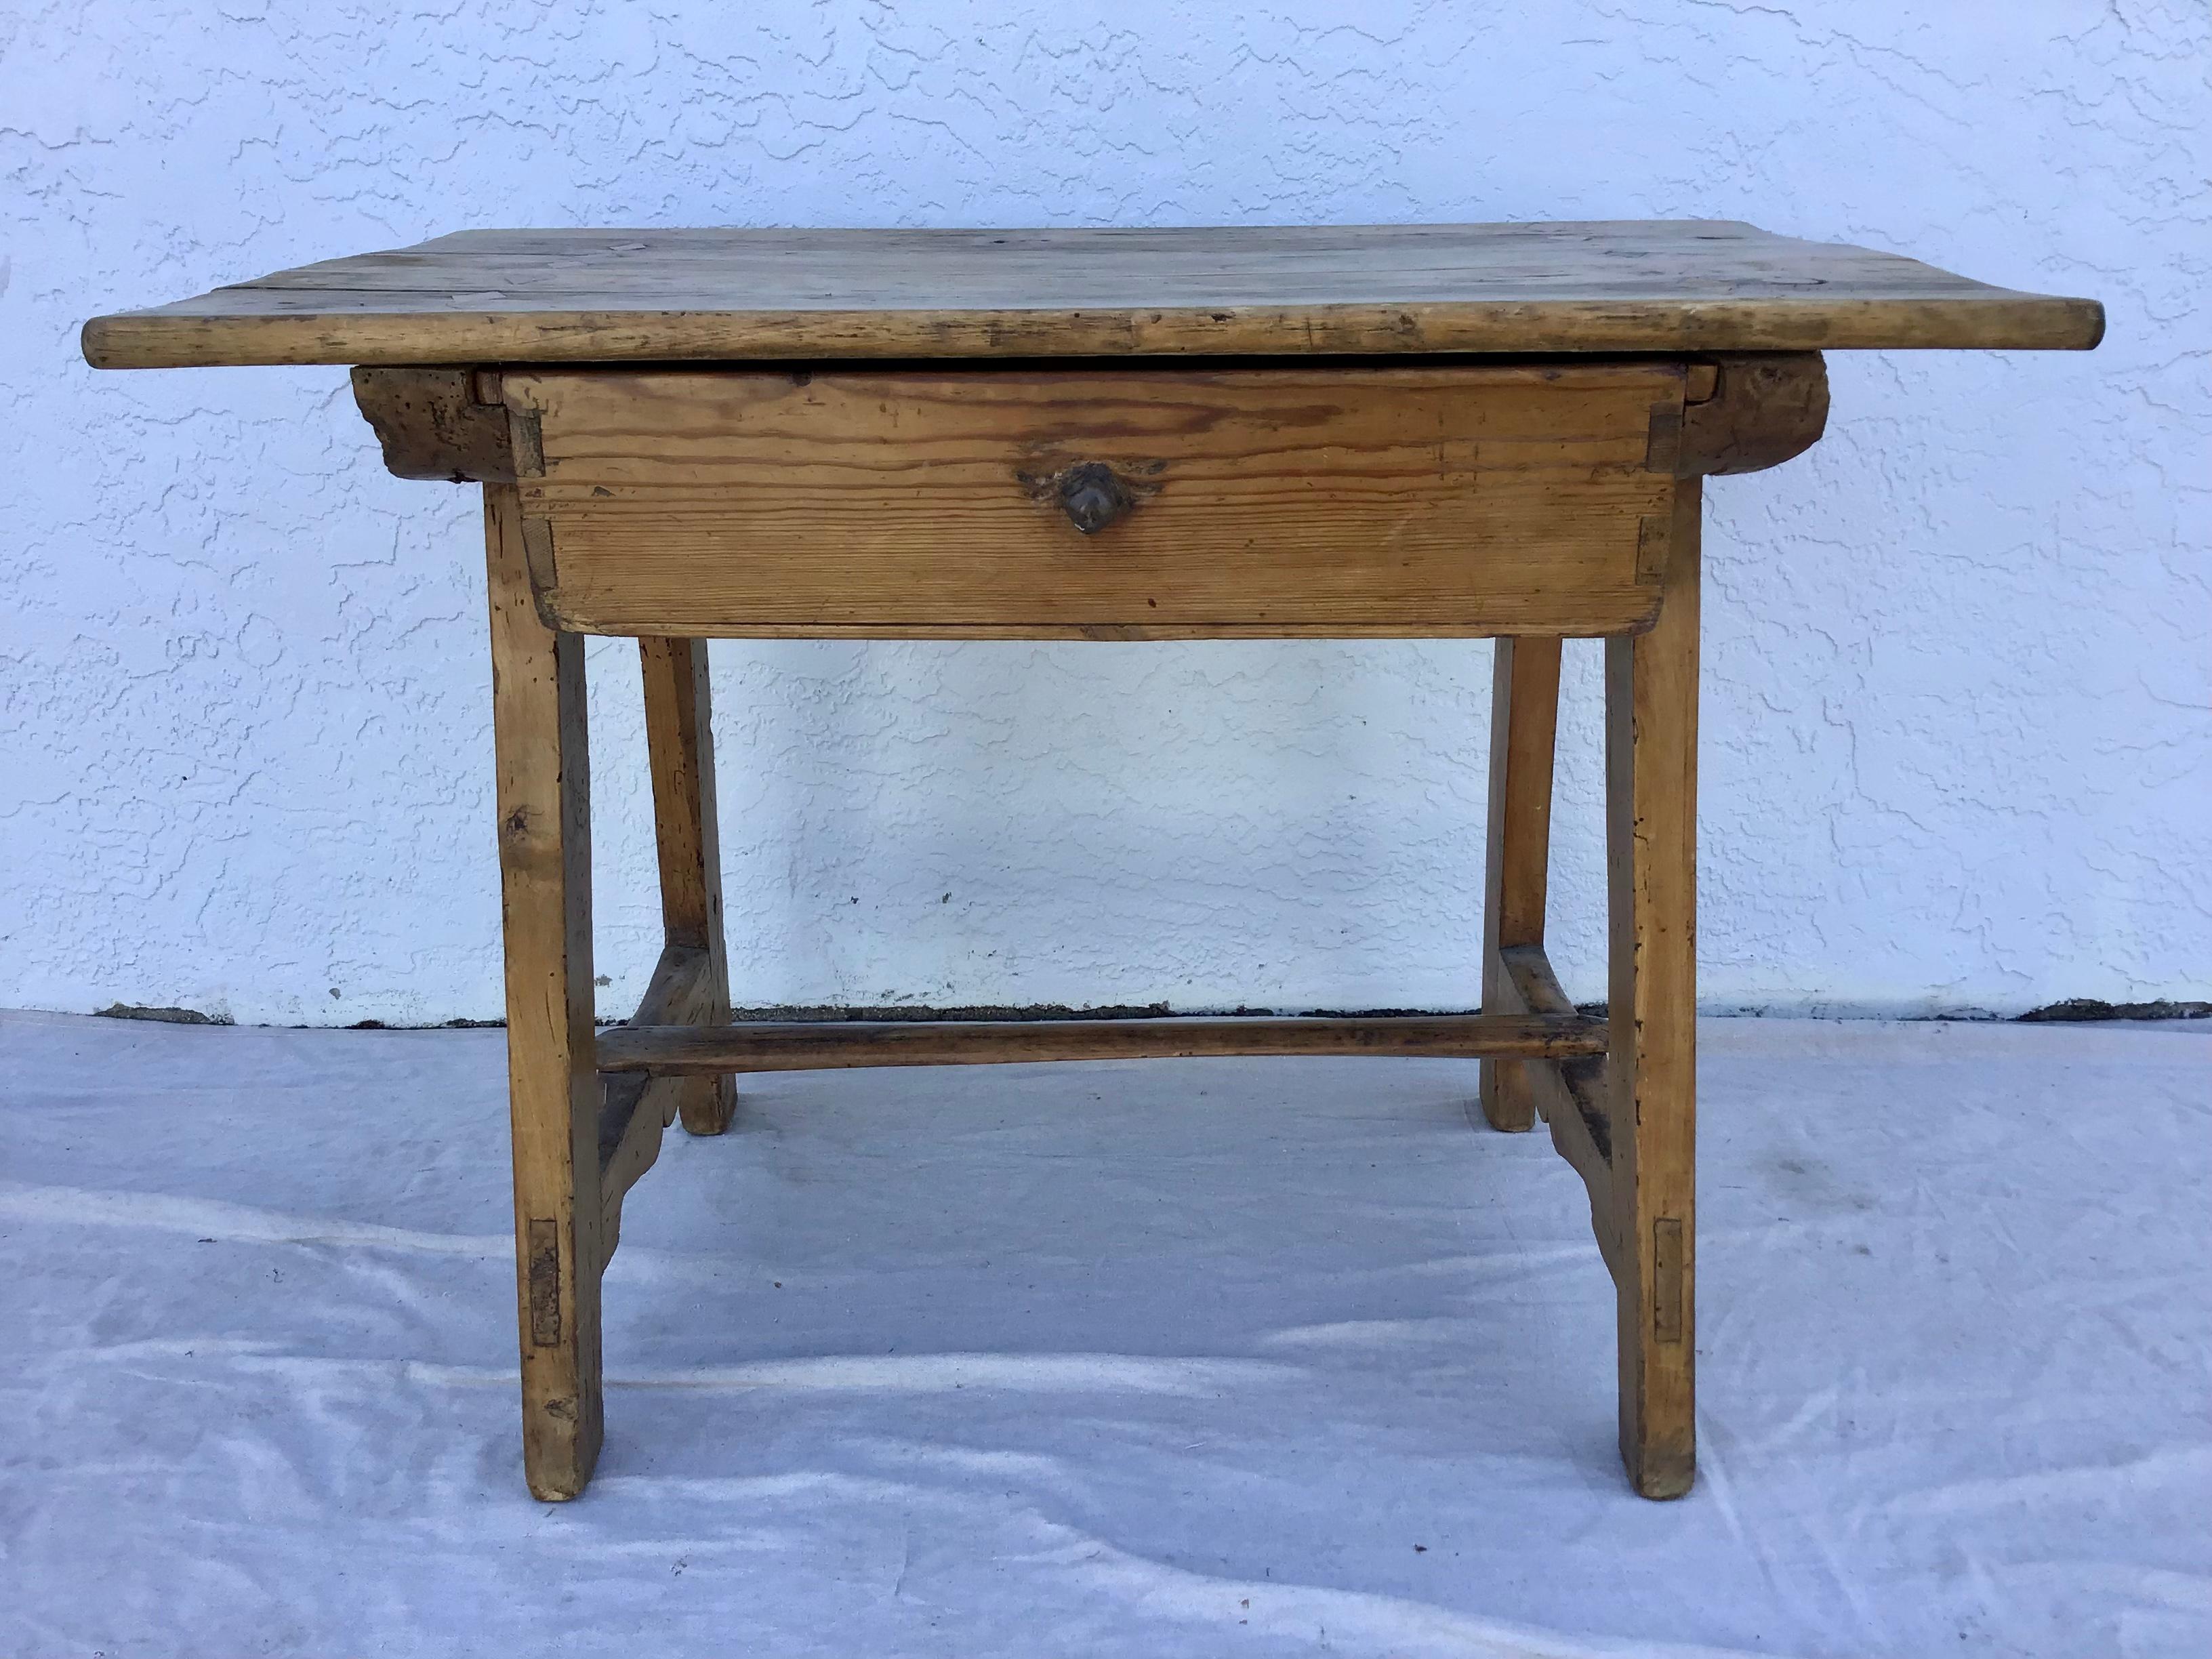 A superb Spanish Colonial one-drawer sabino wood hacienda table, 18th century. Having a rectangular top supported by trestle-form legs, the drawer suspended from below the top, the legs joined by a simple stretcher. Wonderful old wear and patina.